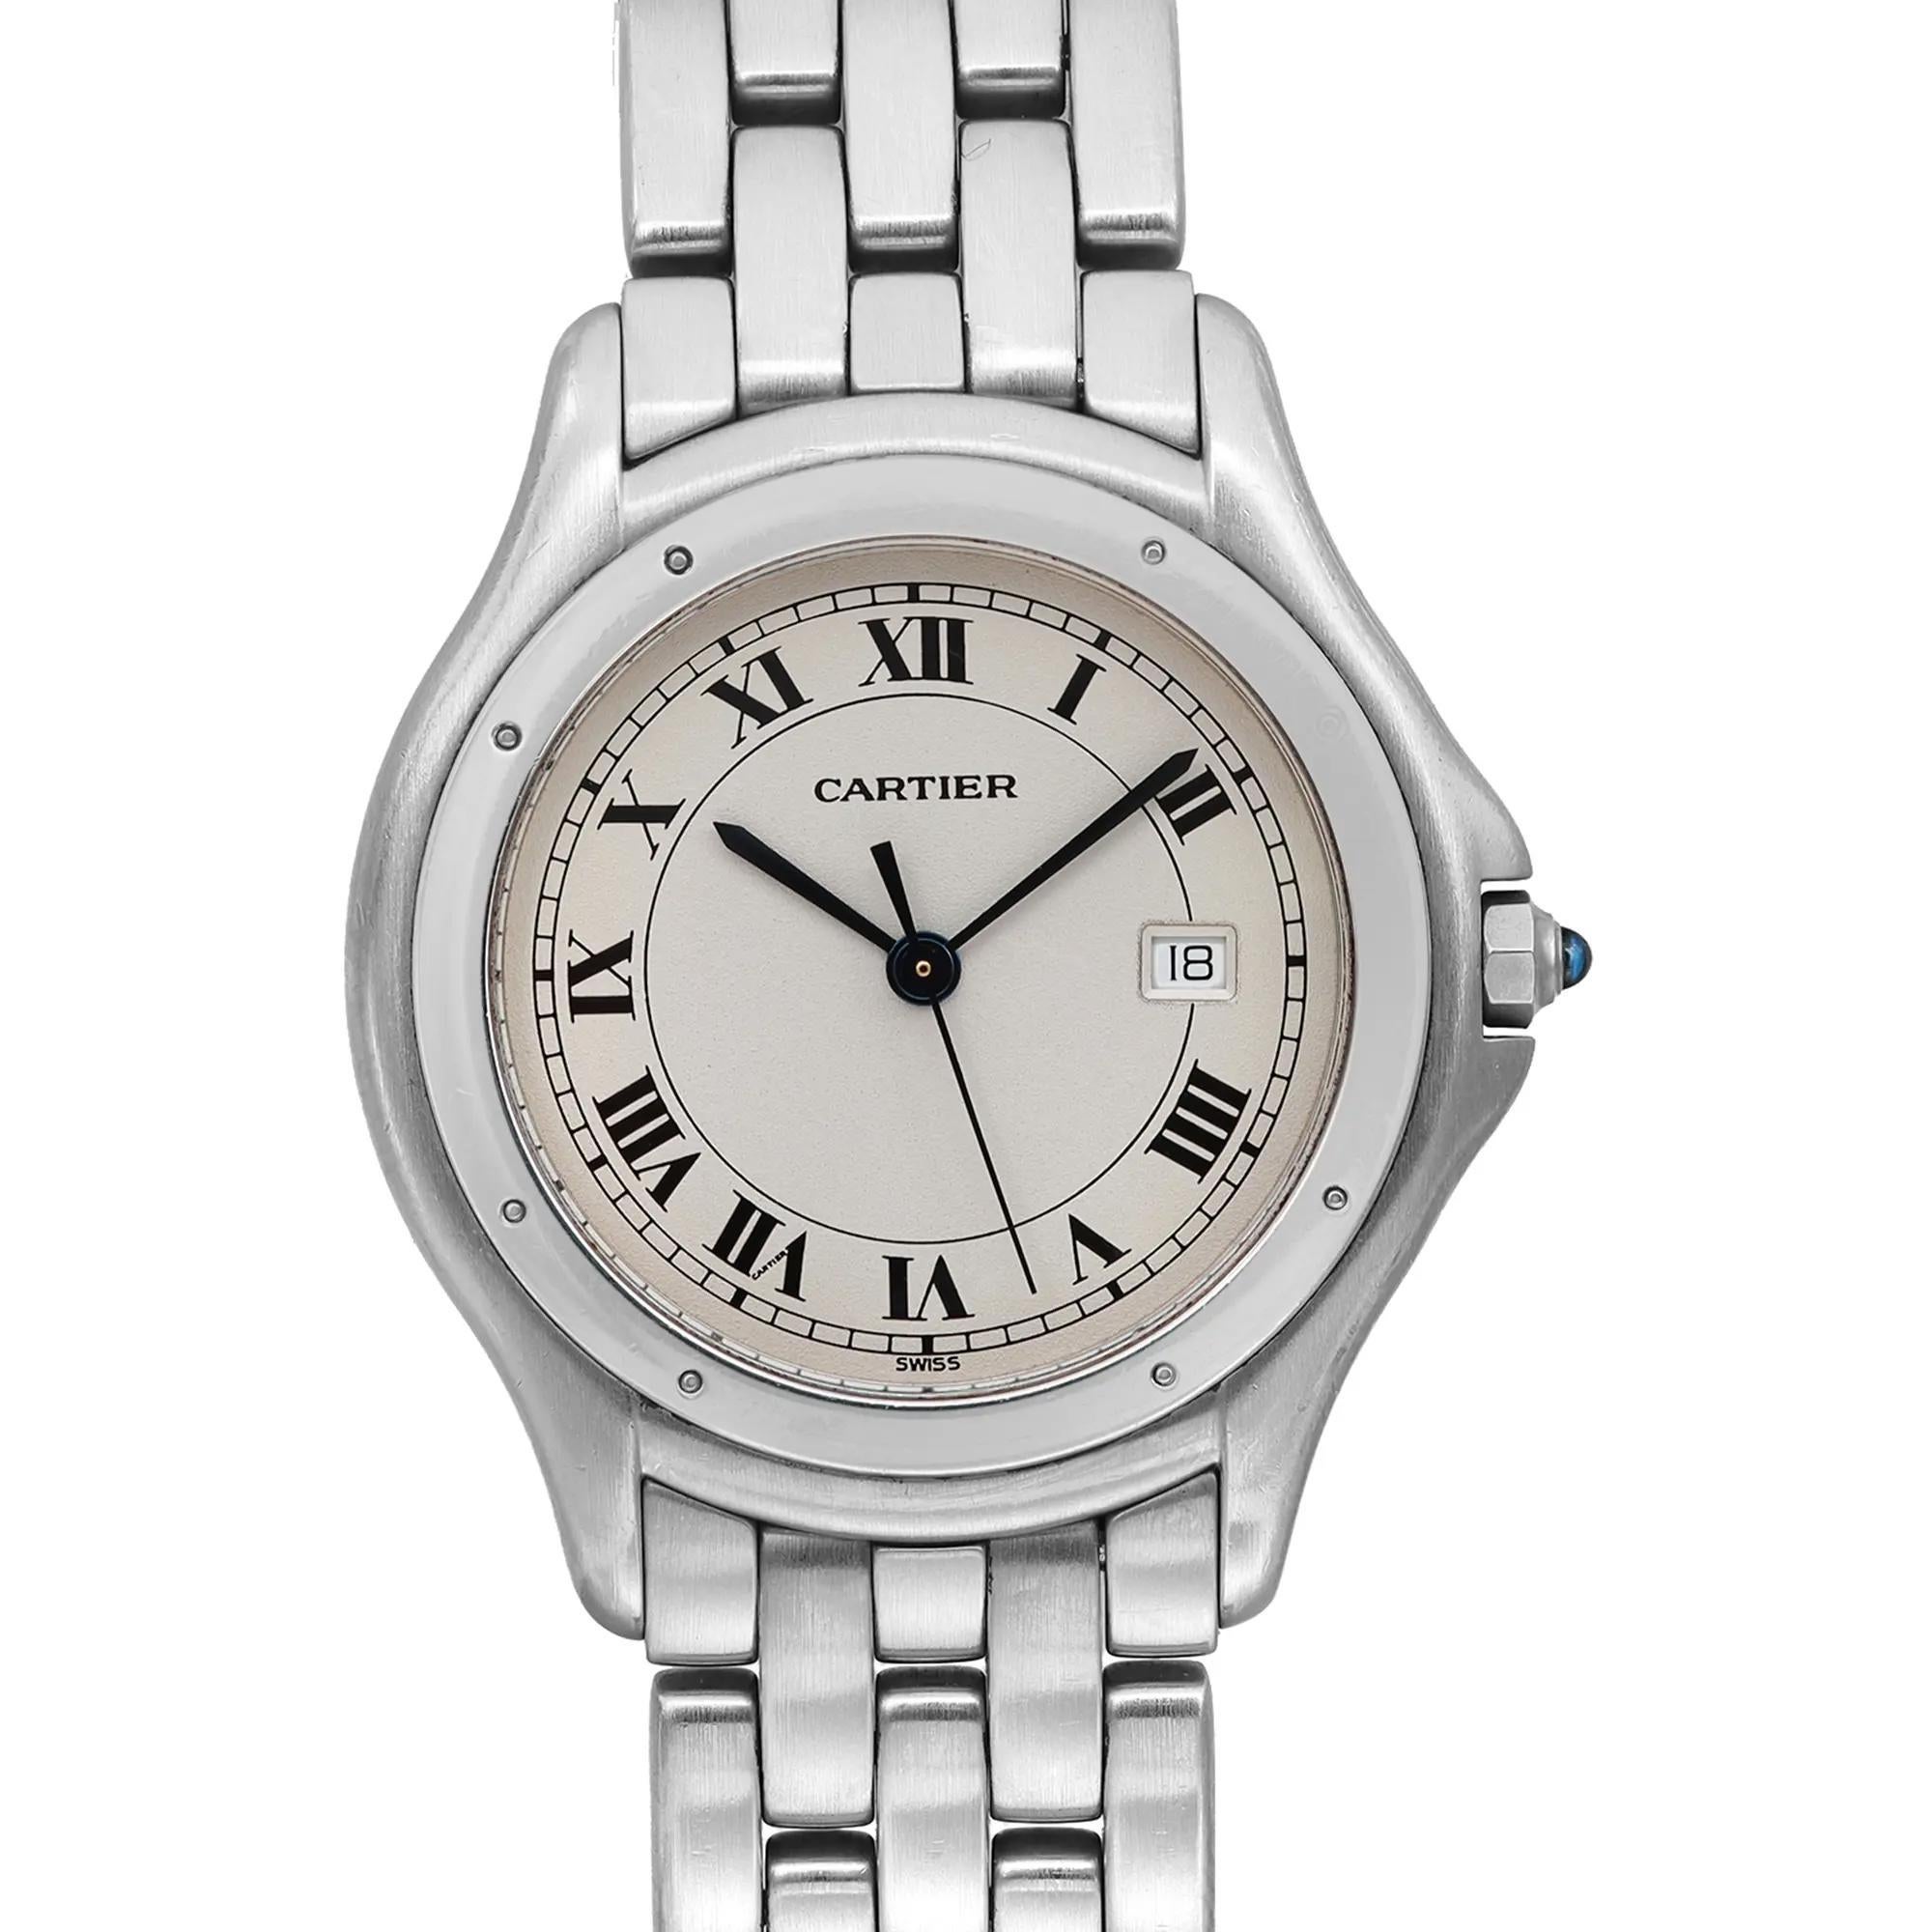 Pre-owned. The original box and paper are not included. Comes with a presentation box and a seller authenticity card.

 Brand: Cartier  Type: Wristwatch  Department: Unisex Adult  Model Number: W35002F5  Country/Region of Manufacture: Switzerland 